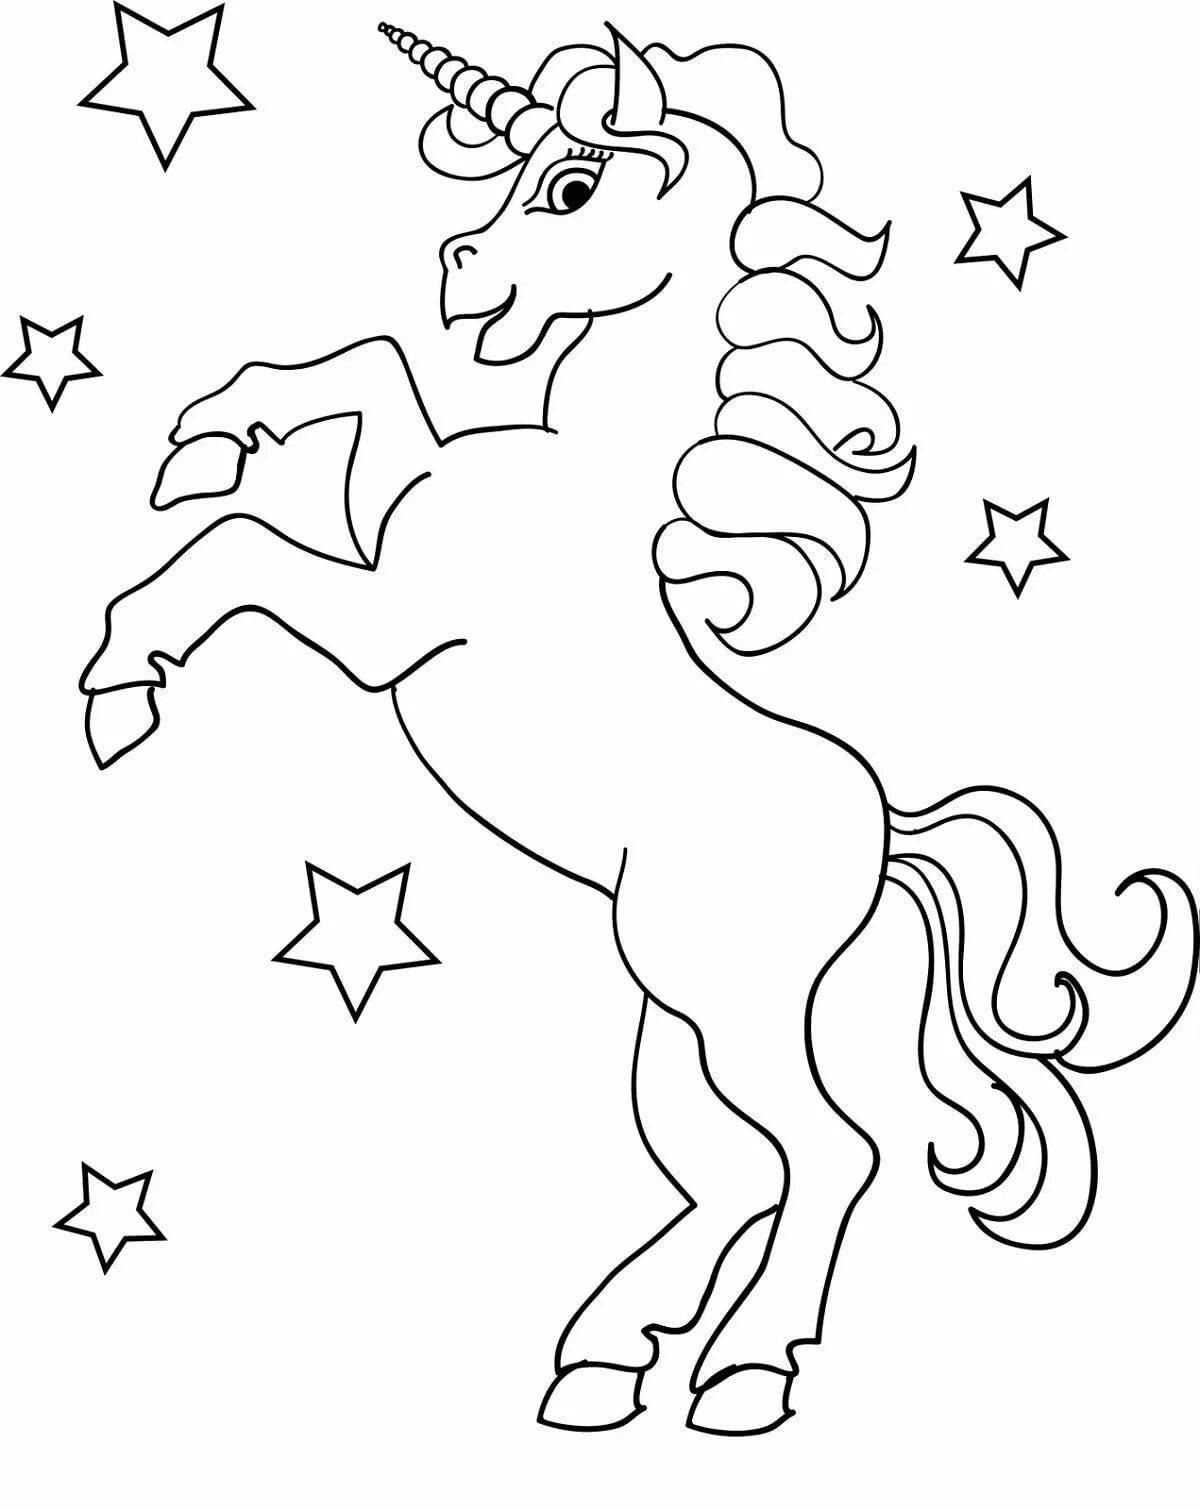 Coloring page charming new year unicorn